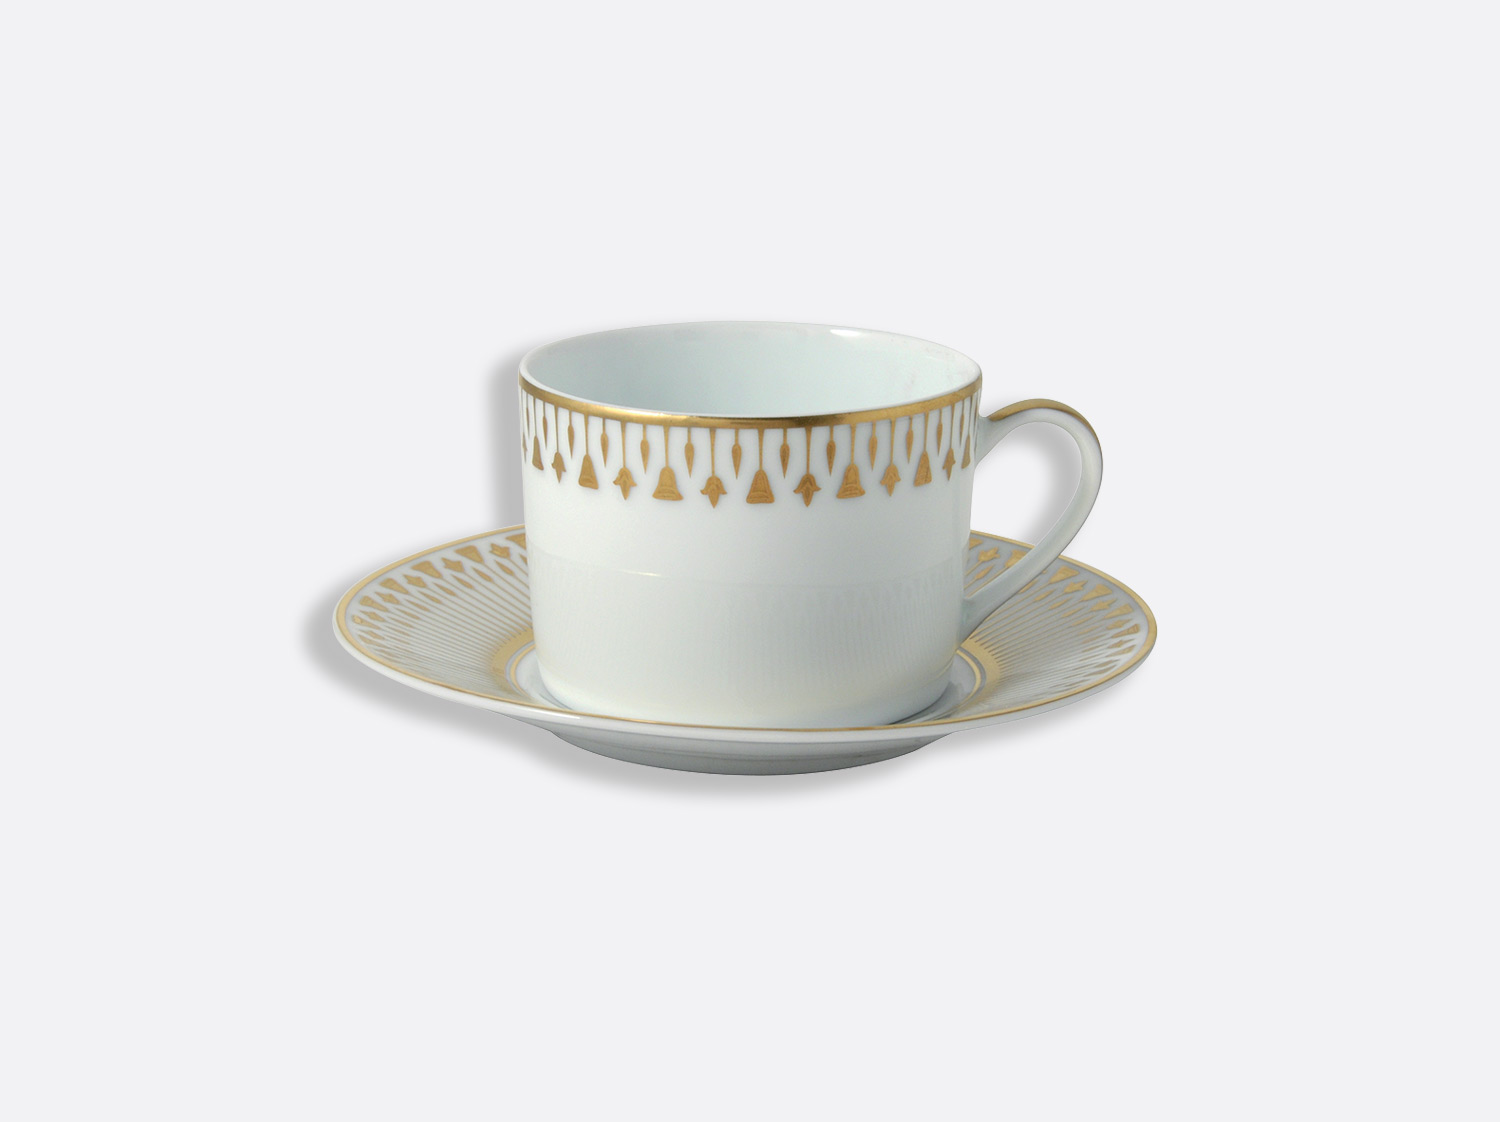 China Per unit of the collection Soleil levant | Bernardaud